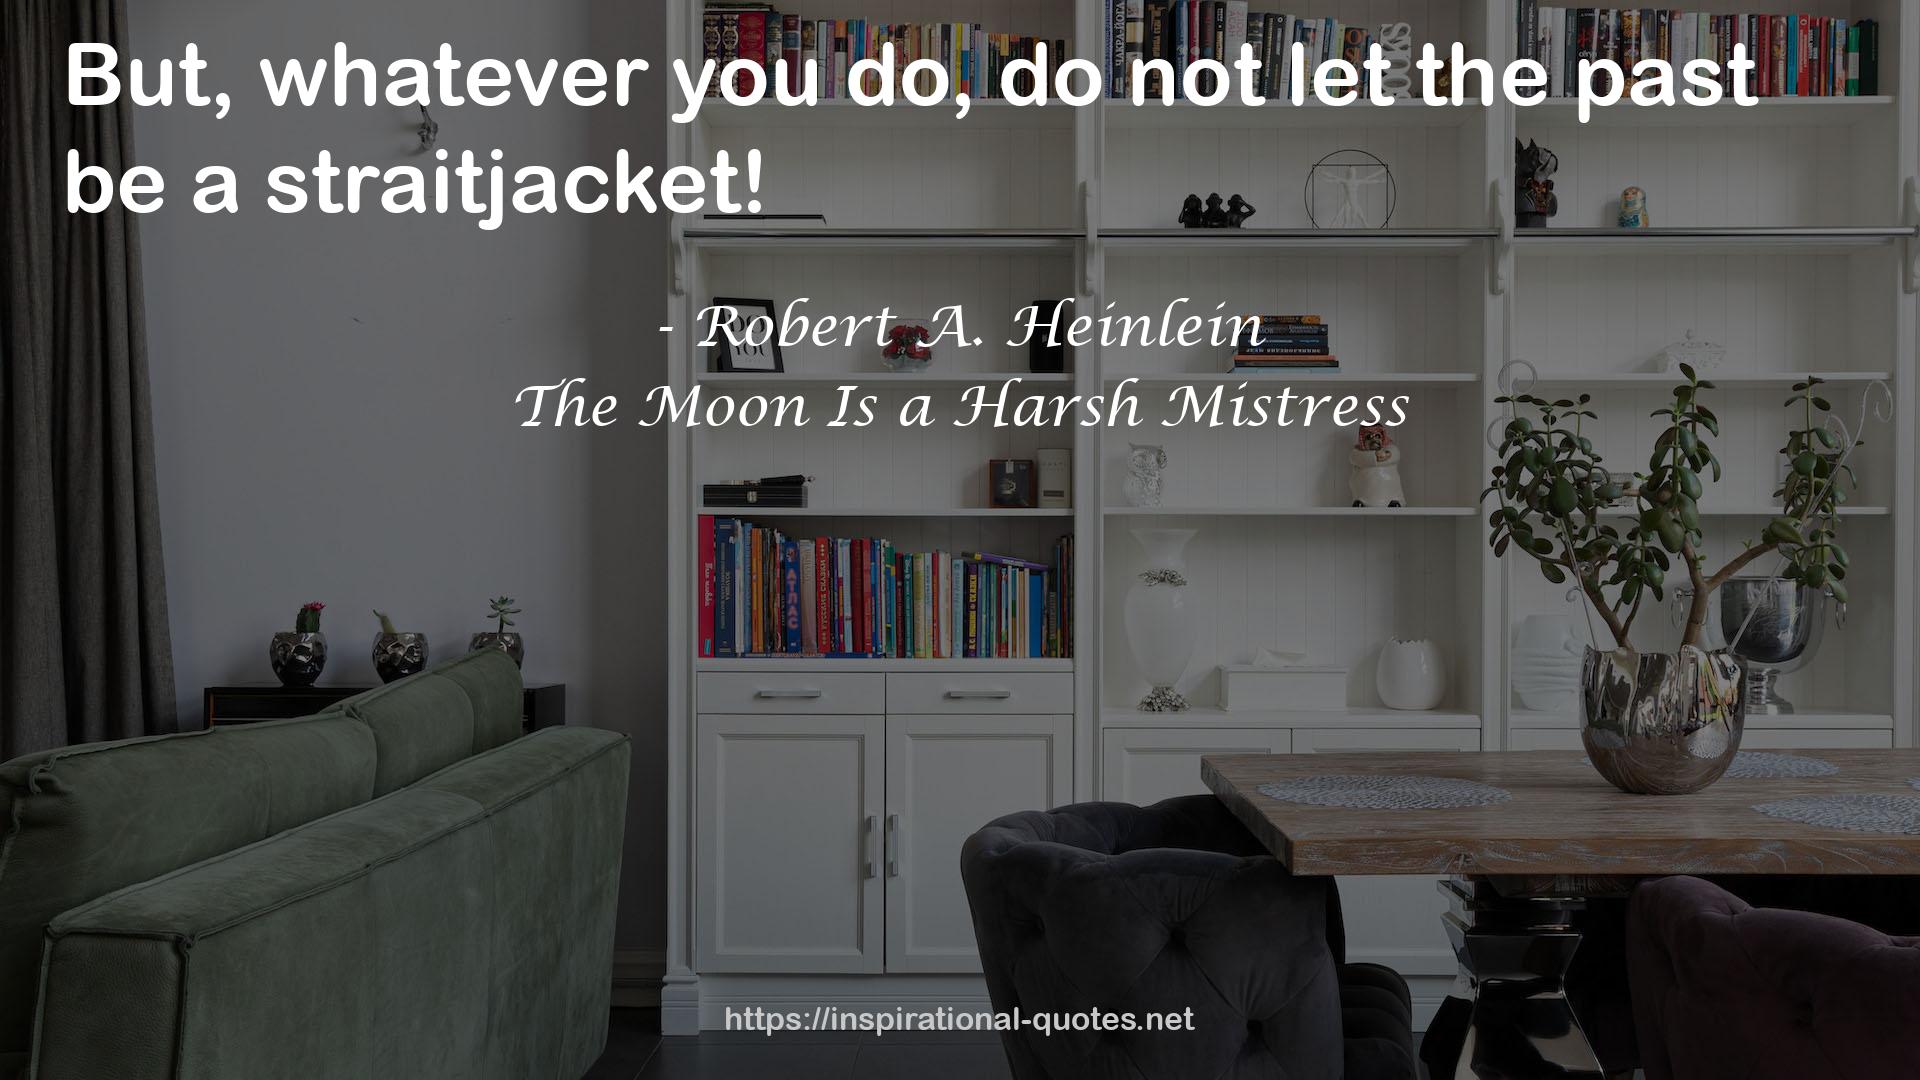 The Moon Is a Harsh Mistress QUOTES